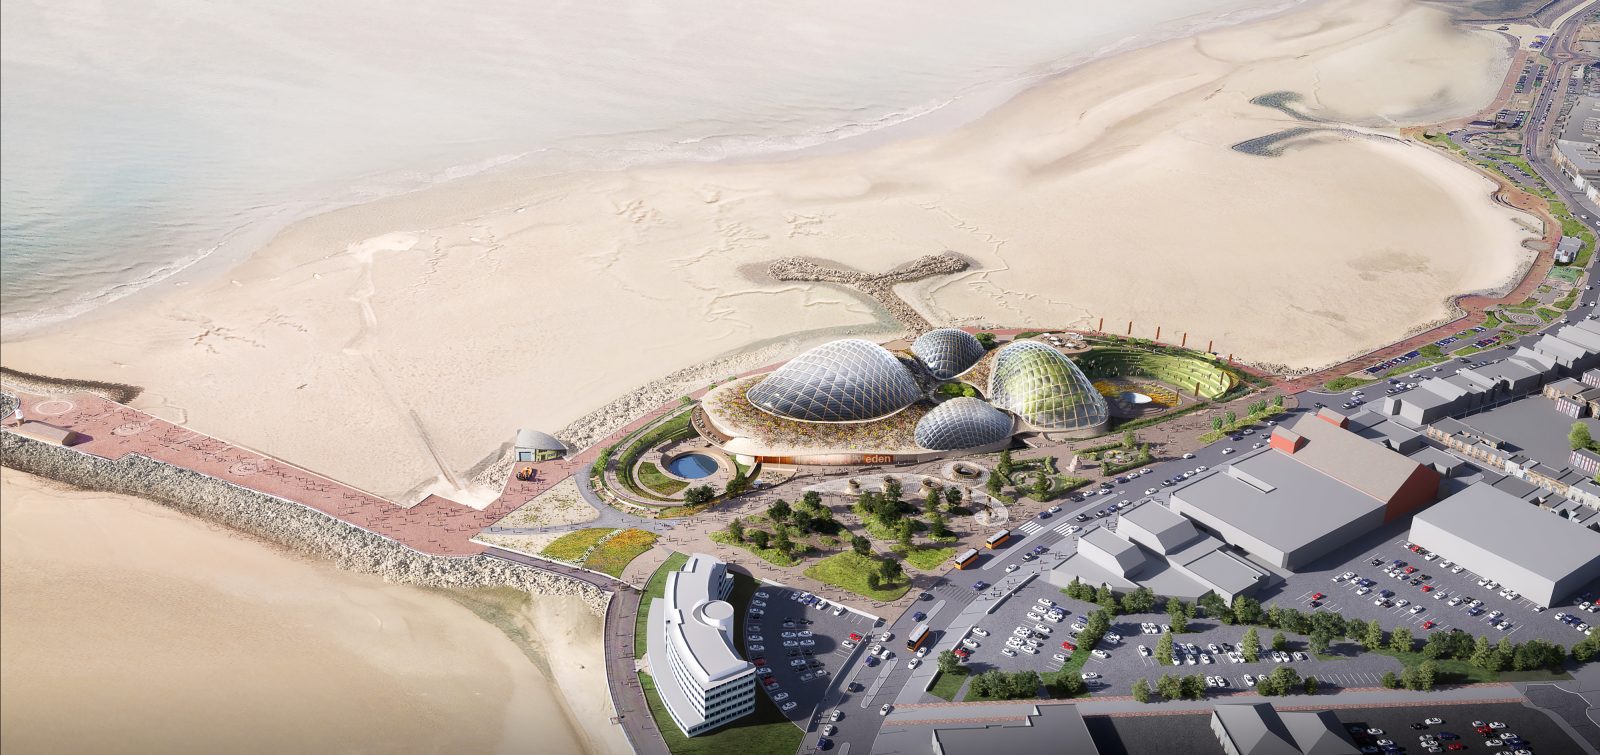 Planning permission granted to build £125m Eden Project North in Morecambe, The Manc